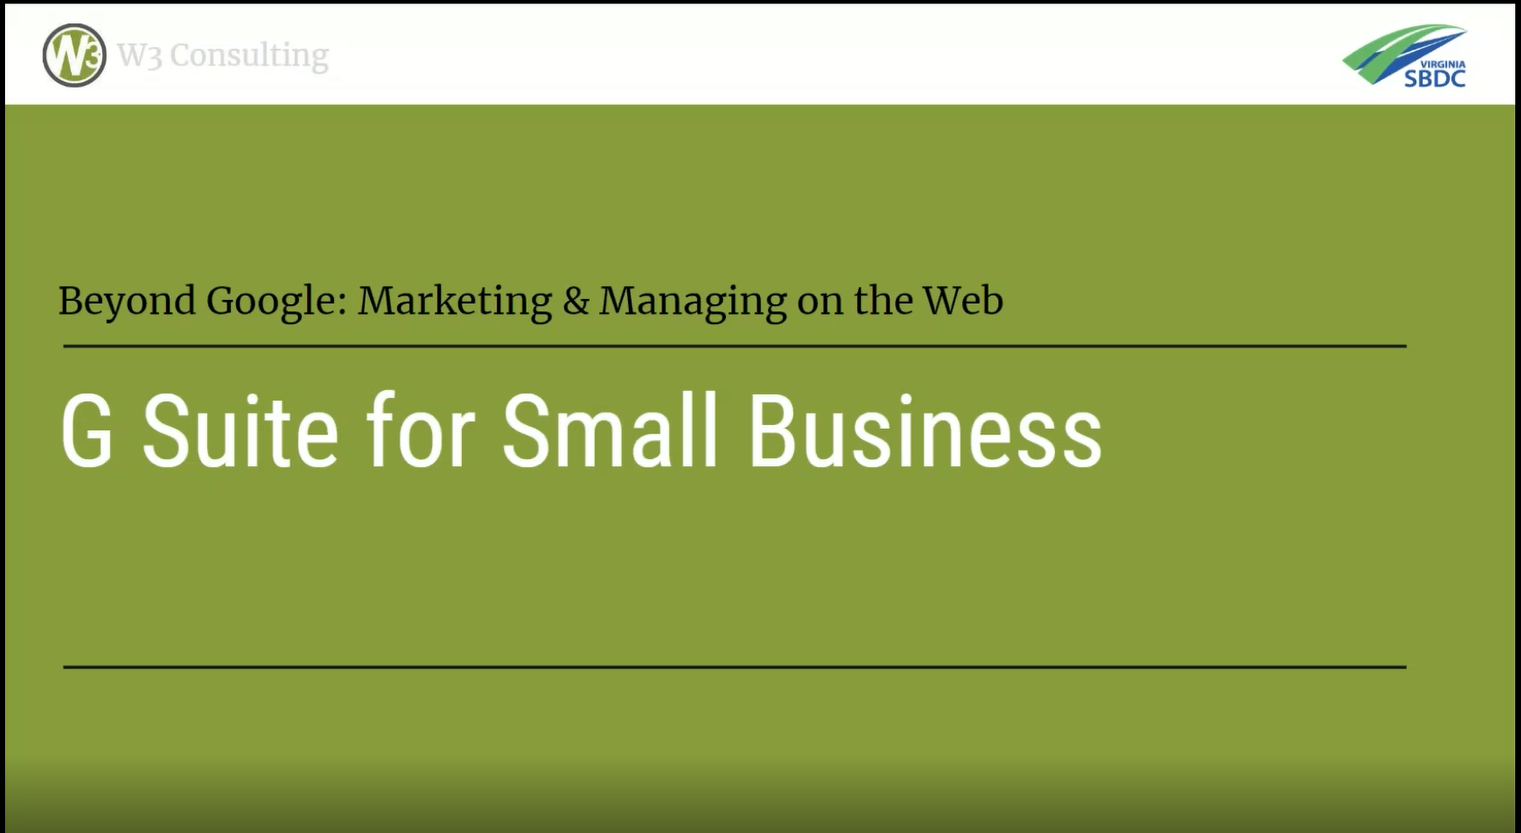 G Suite for Small Business